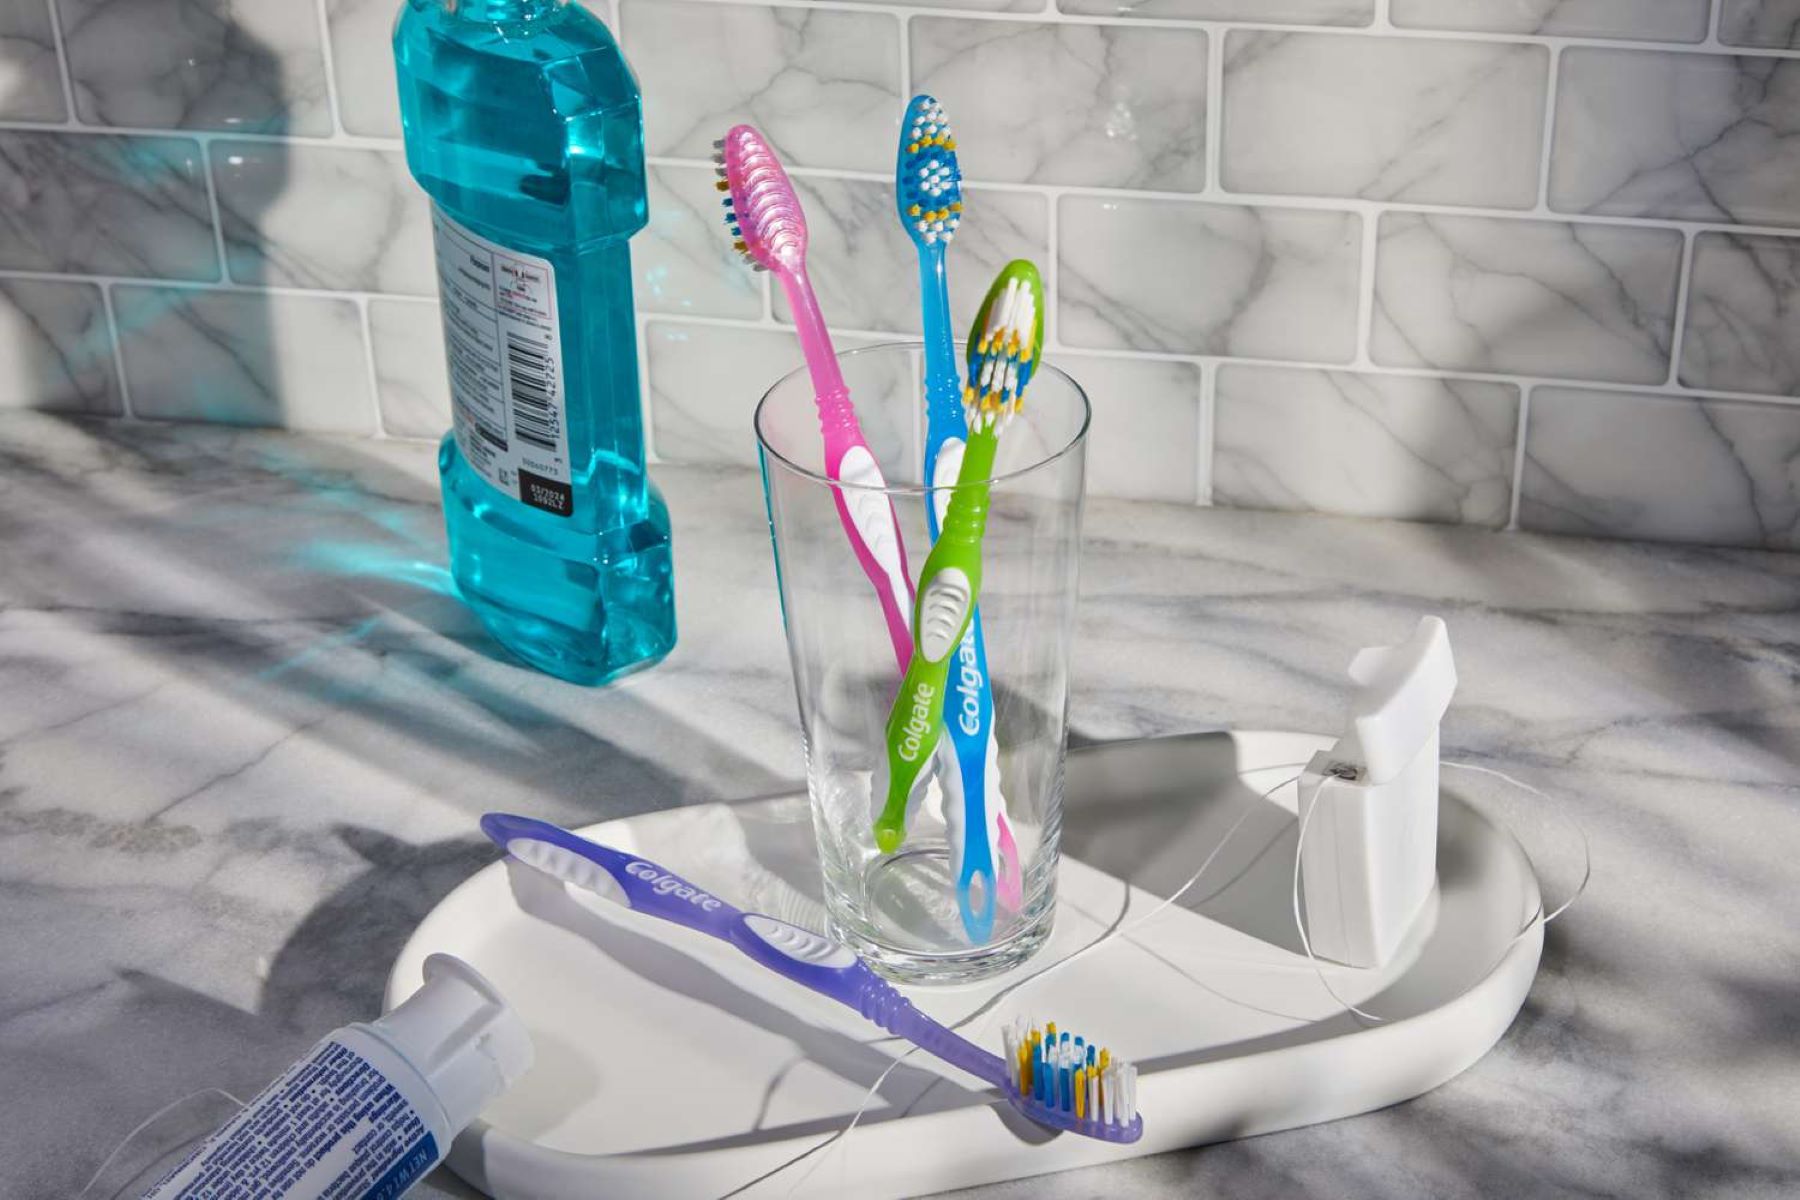 What Is The Best Toothbrush: Soft, Medium, Or Hard